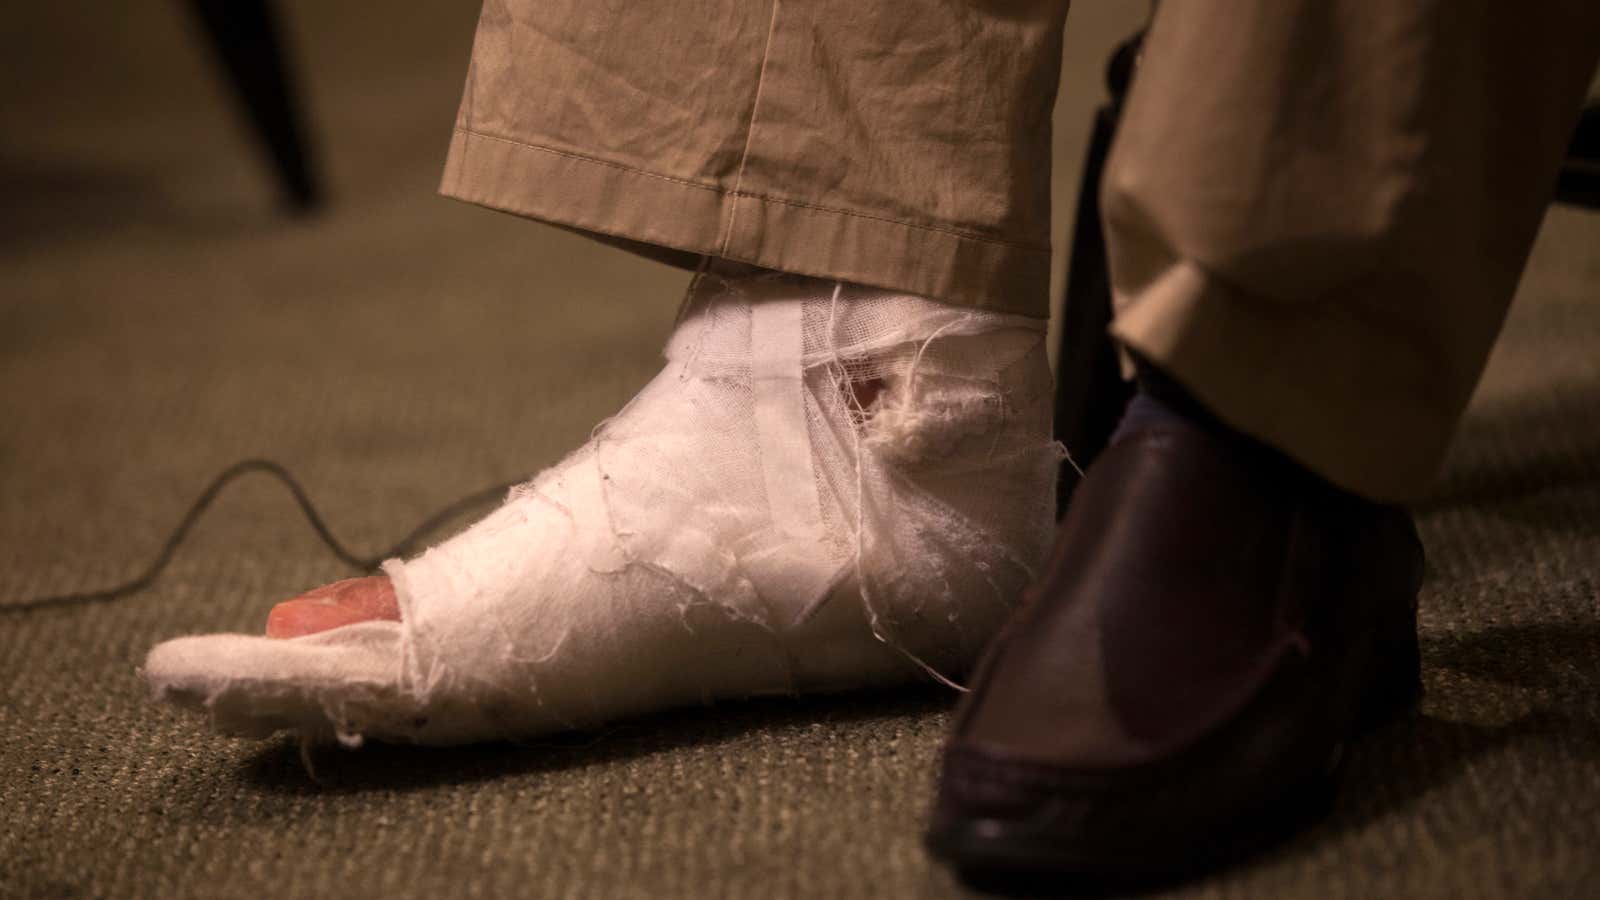 A cast on the right foot of Chen Guangcheng, a blind Chinese dissident and legal advocate who recently sought asylum in the US.